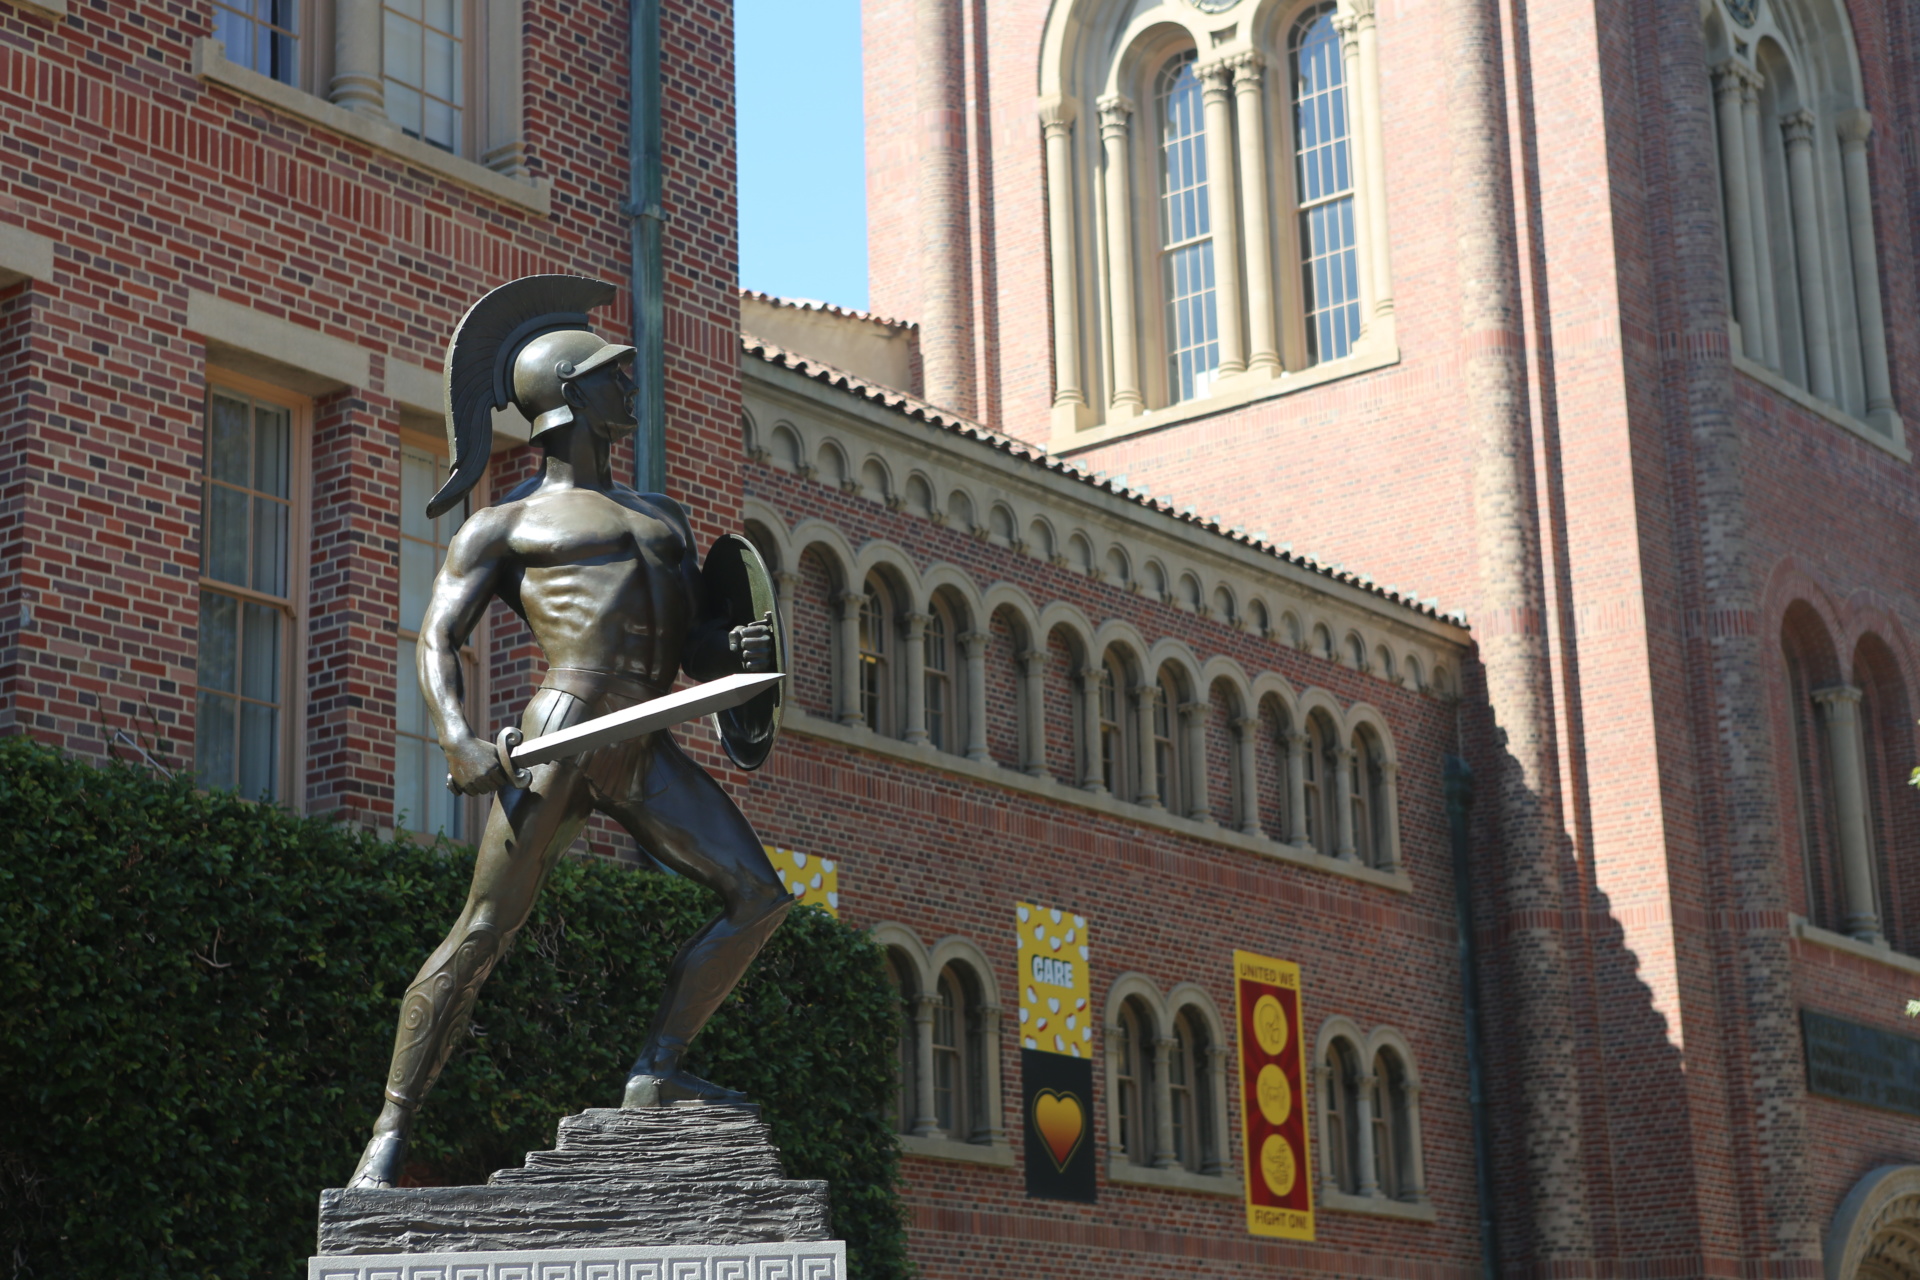 When Will USC Viterbi Admission Decisions be released for Fall 2022?